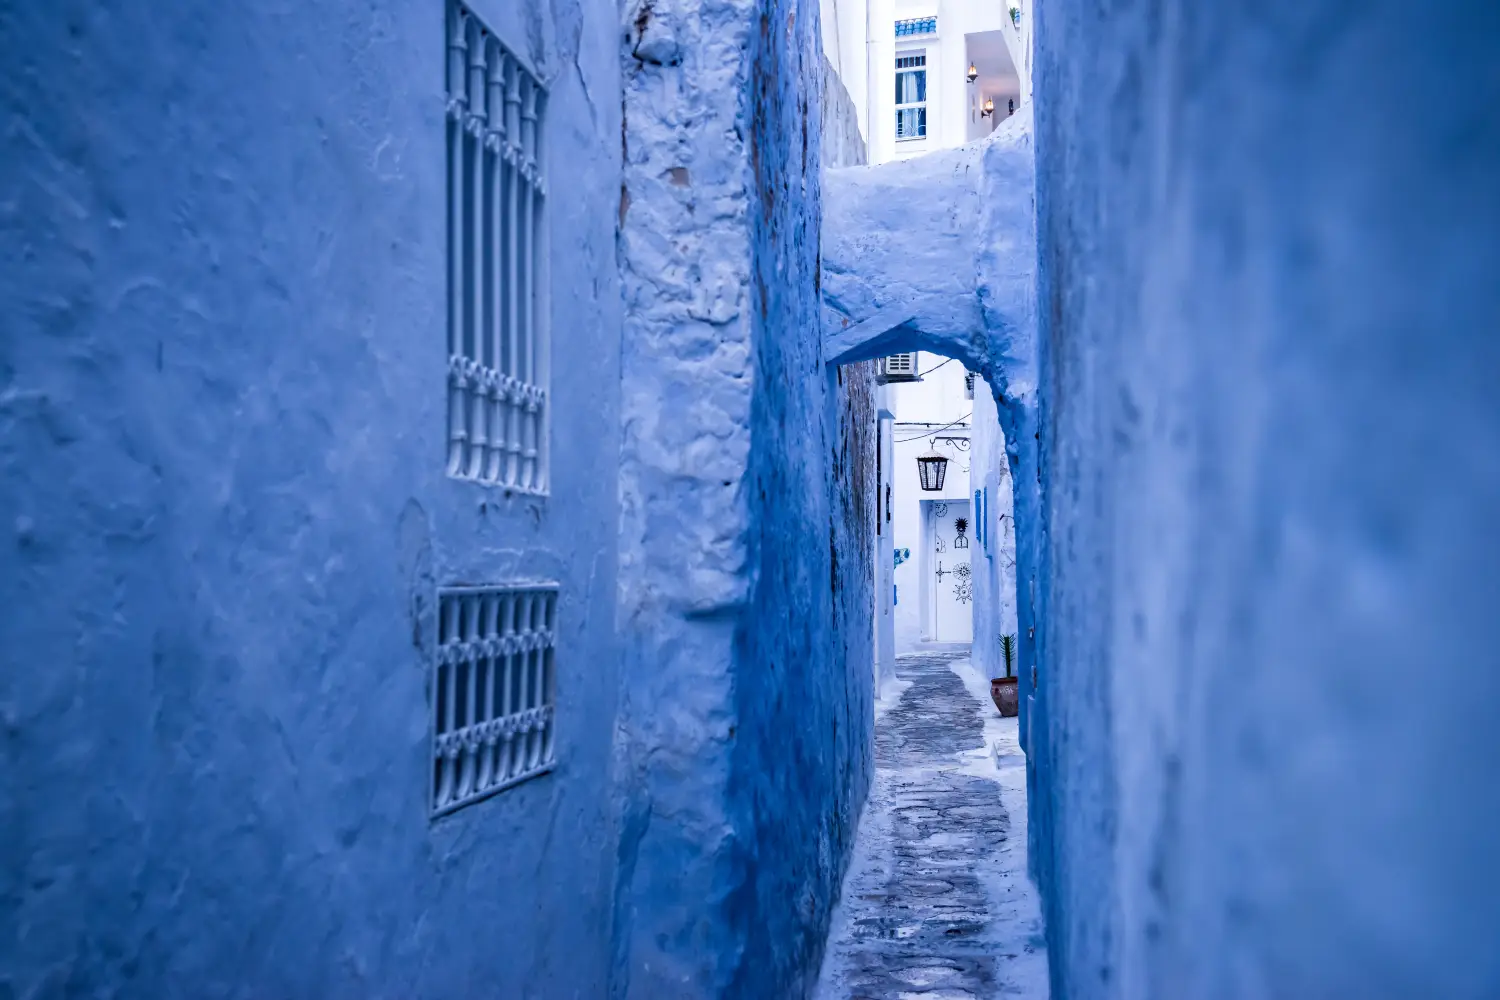 Ferry to Tunis - Hammamet Medina streets with blue walls. Tunis, north Africa.